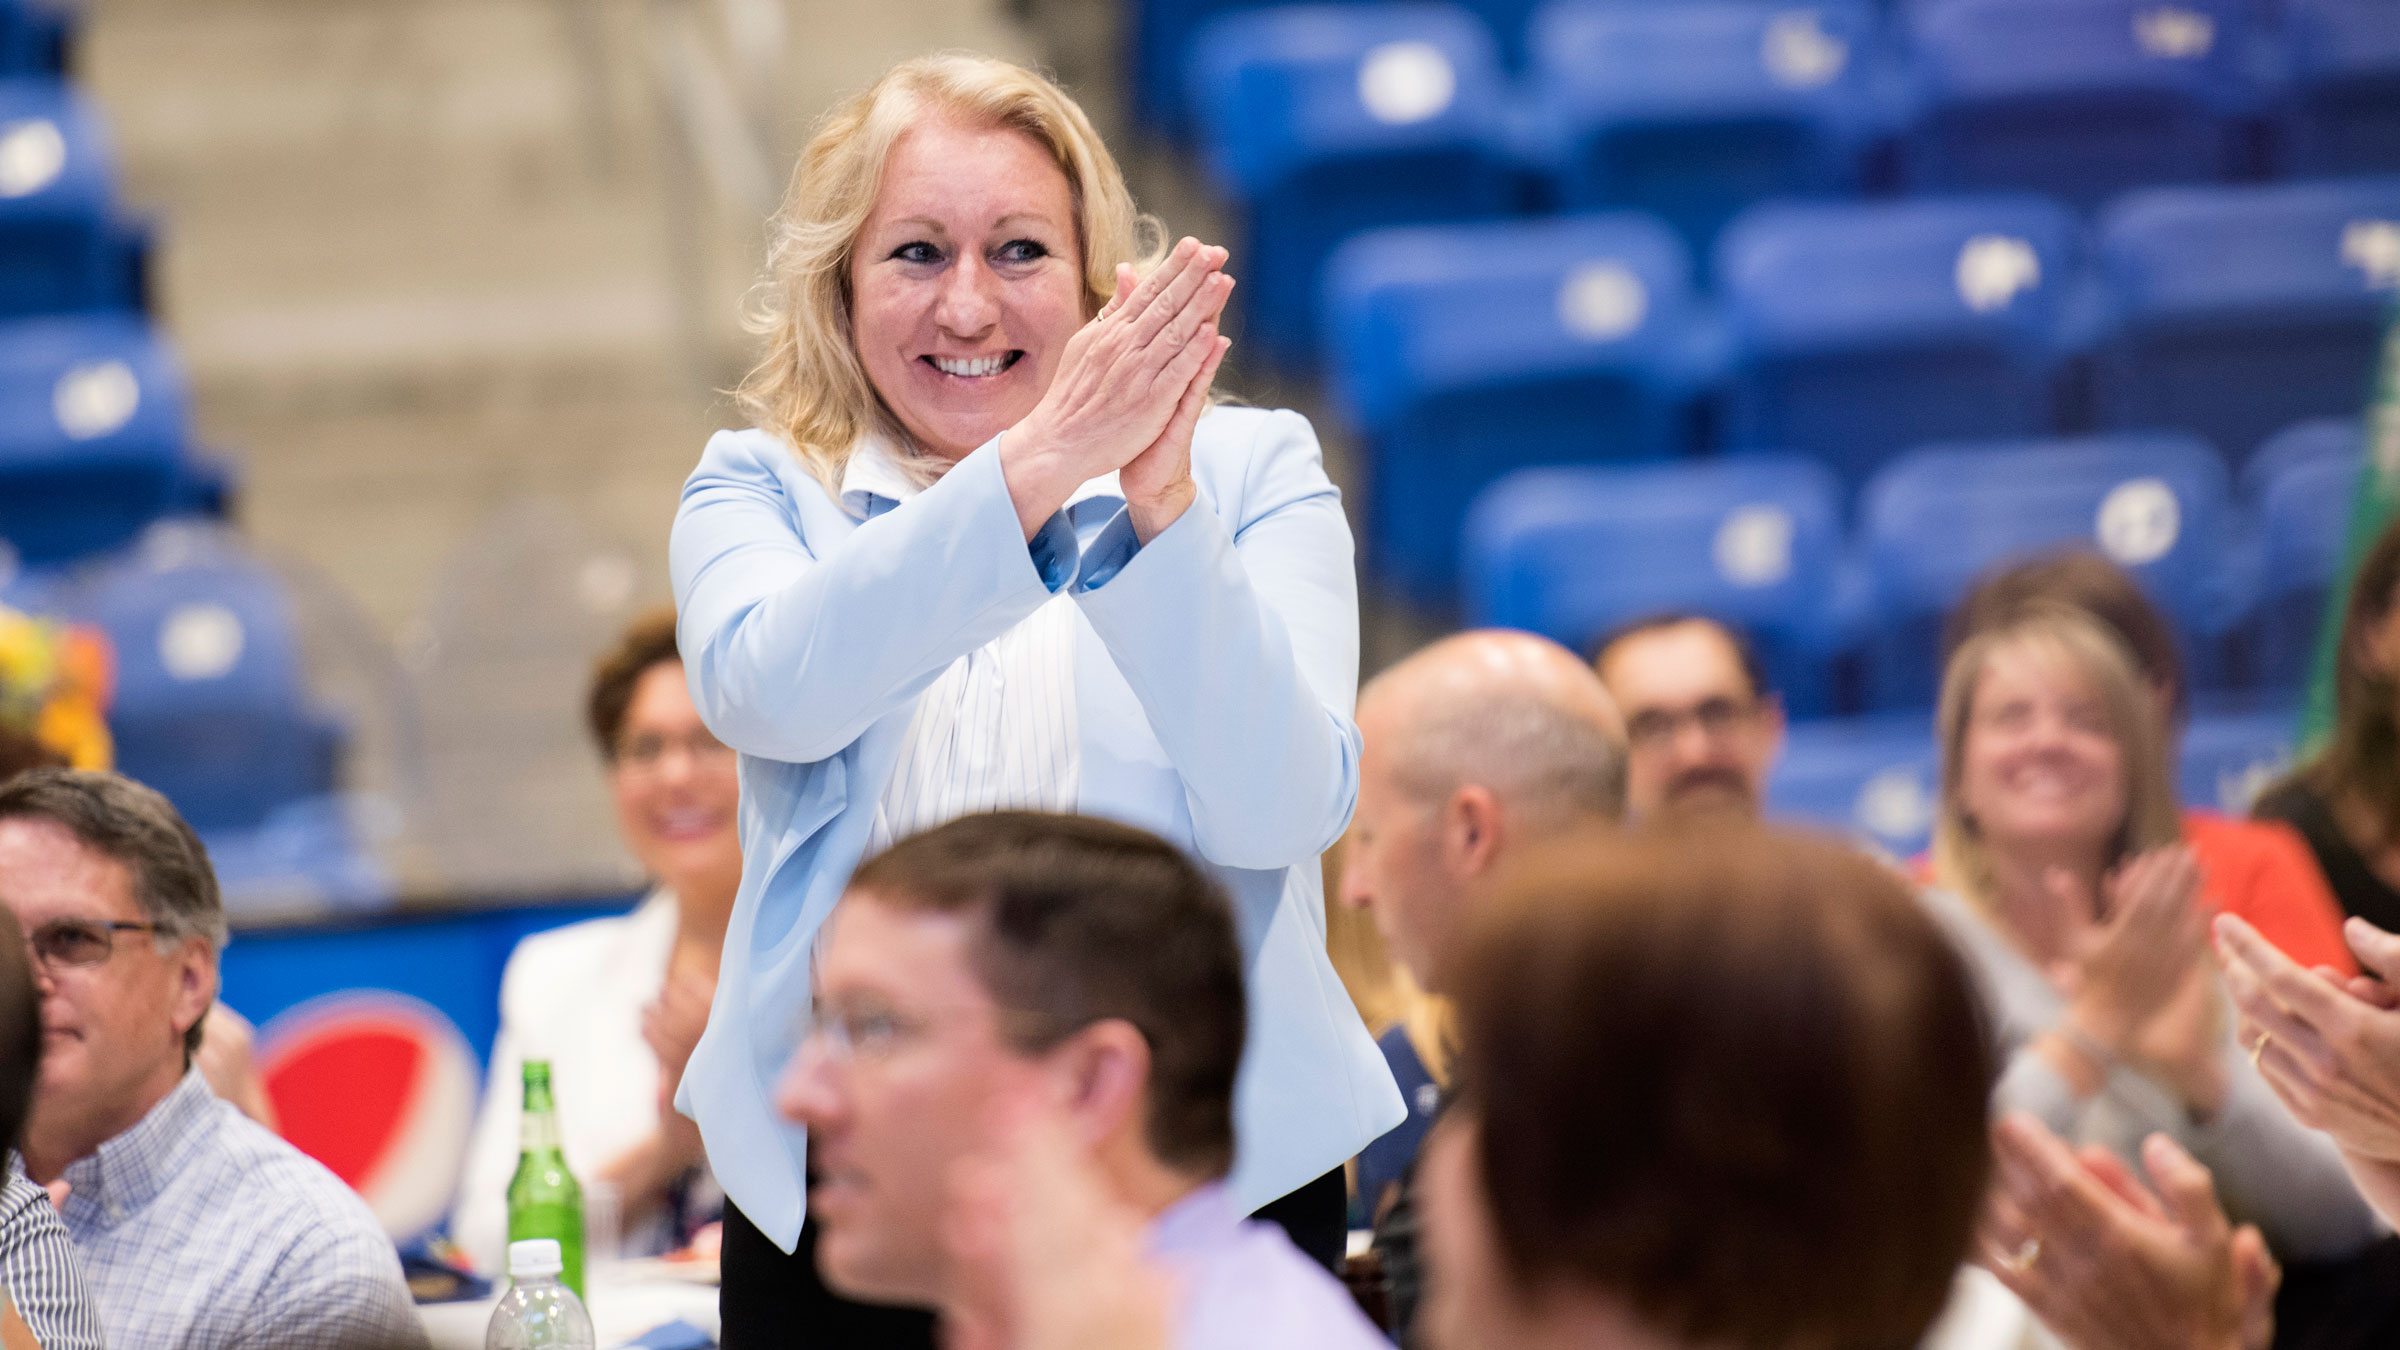 Janice Wachtarz smiles as the crowd around her claps during the Employee Recognition & Retiree Reception event.